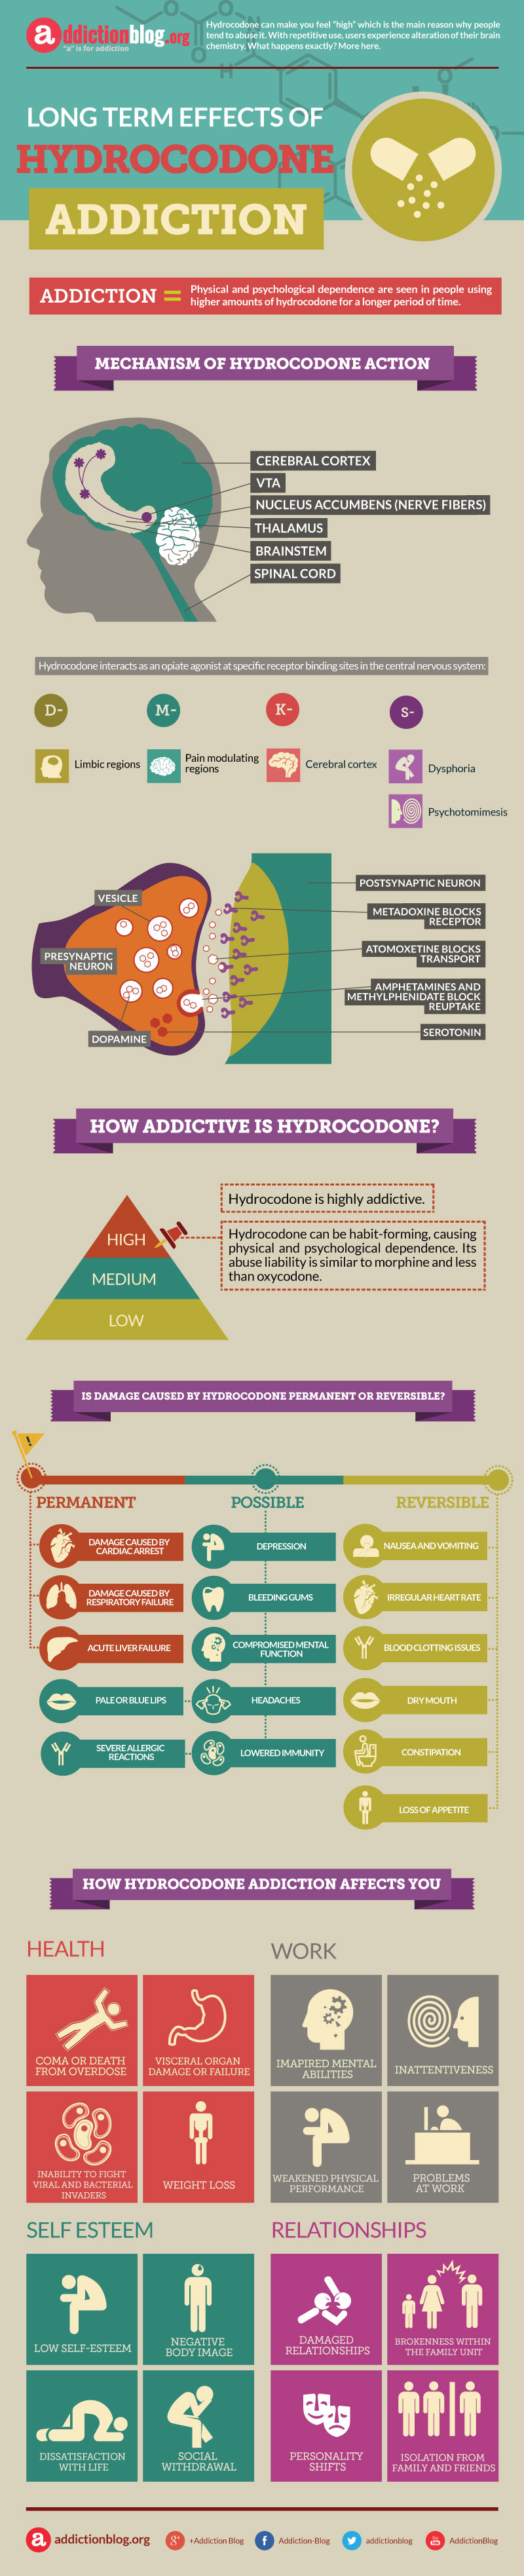 Long term effects of Hydrocodone addiction (INFOGRAPHIC)